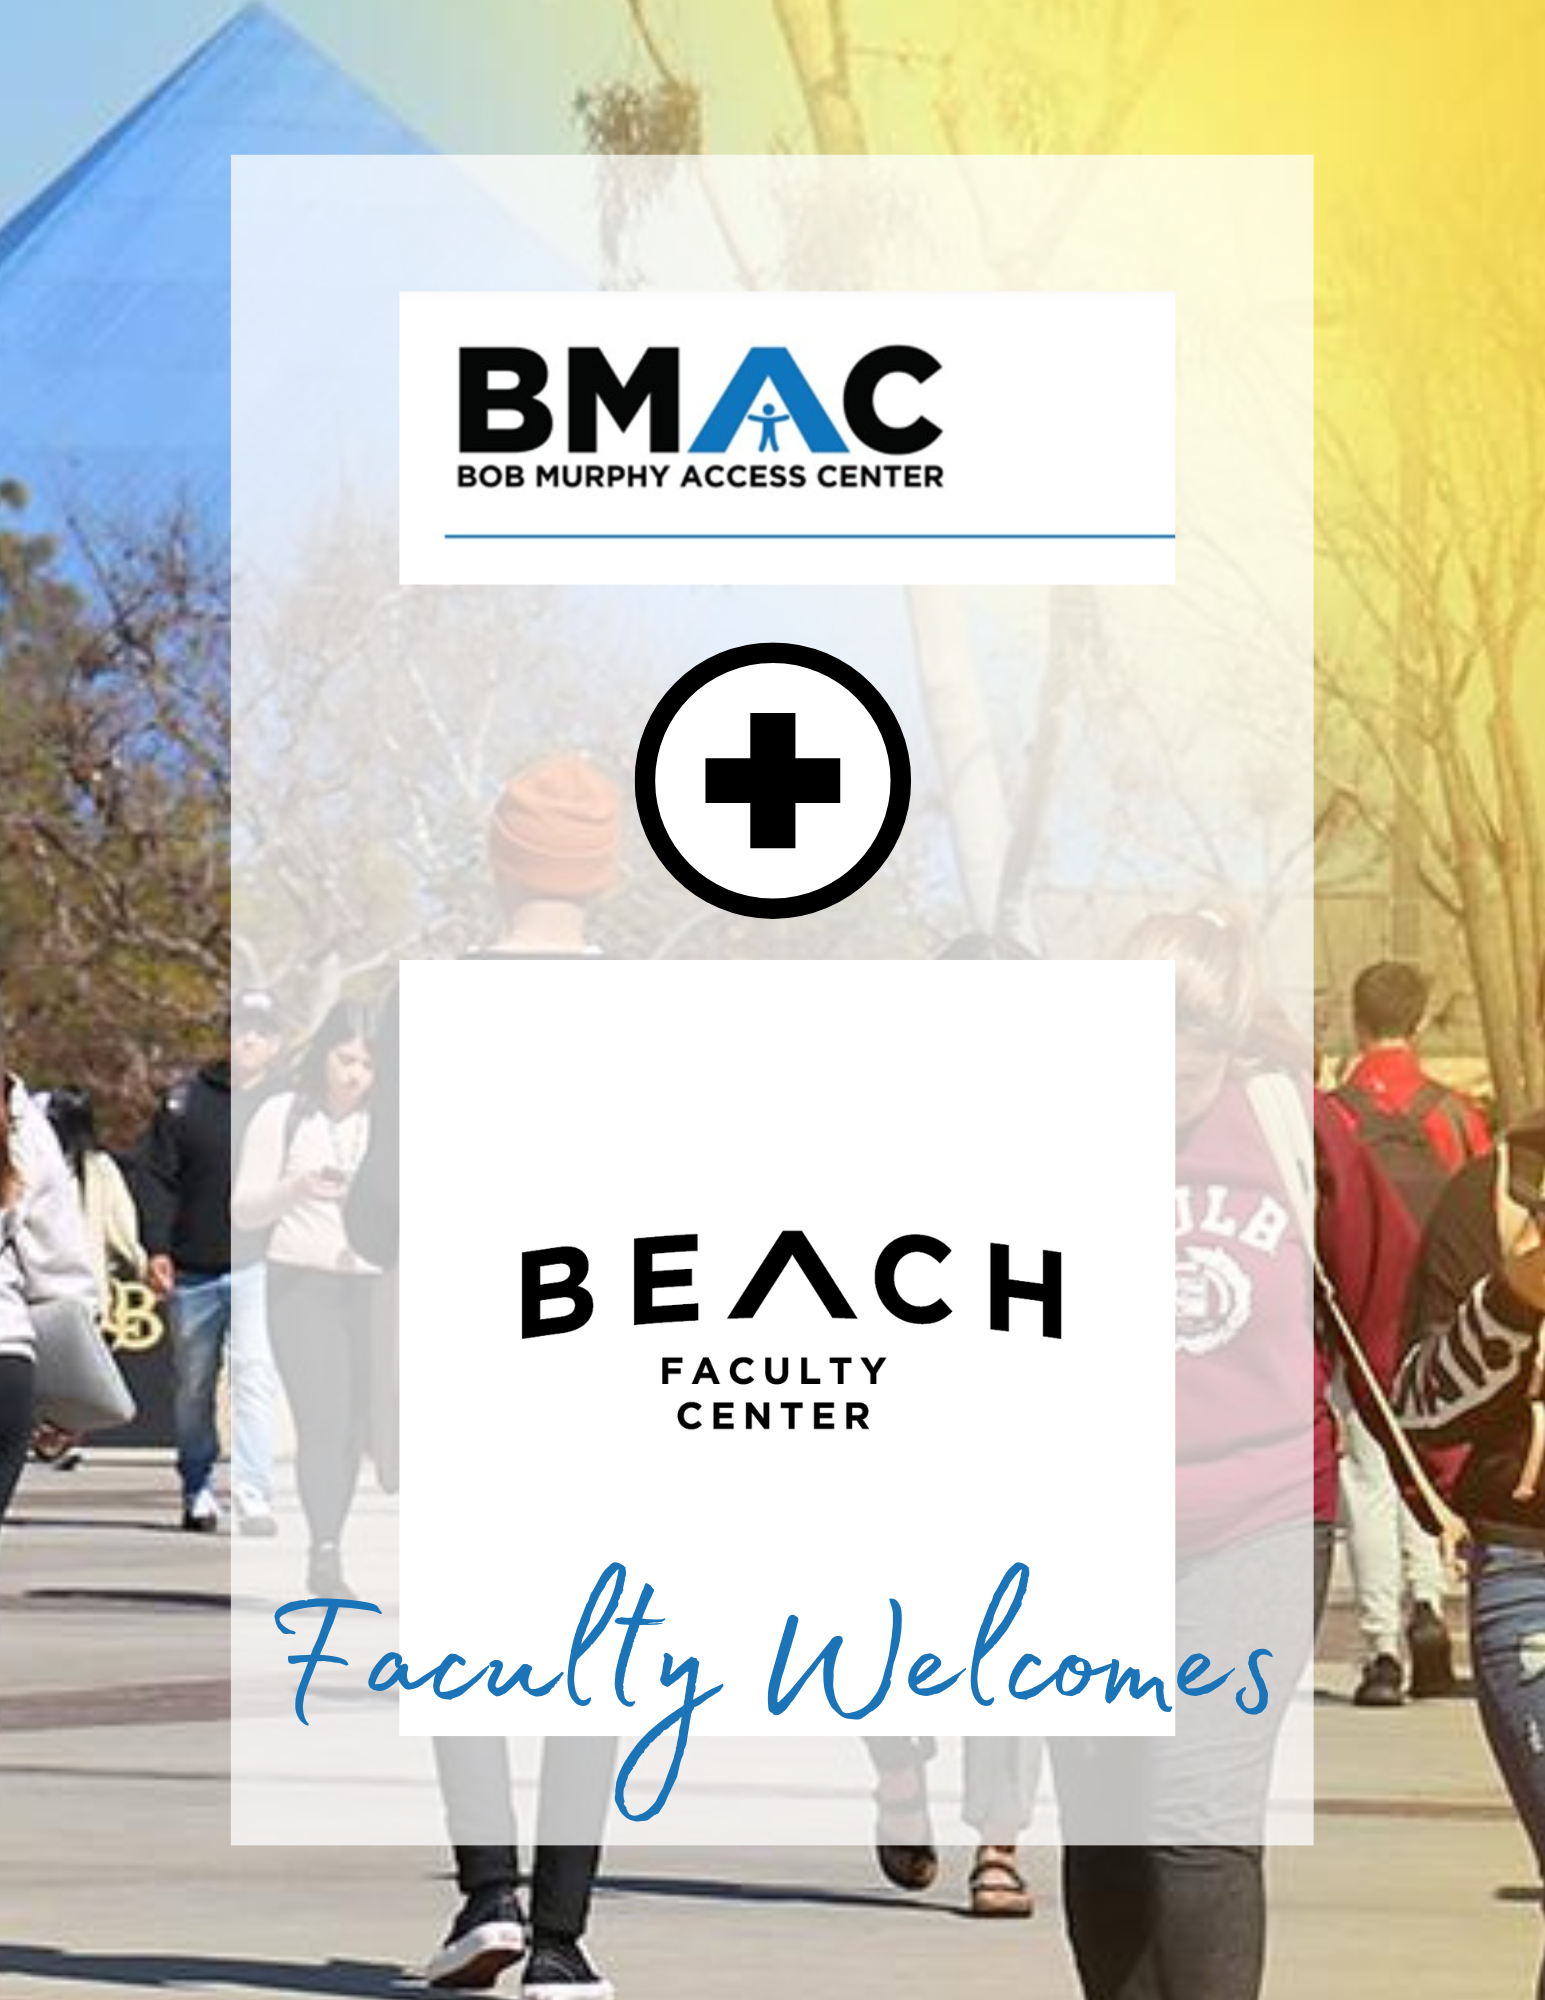 FC BMAC - Faculty Welcomes